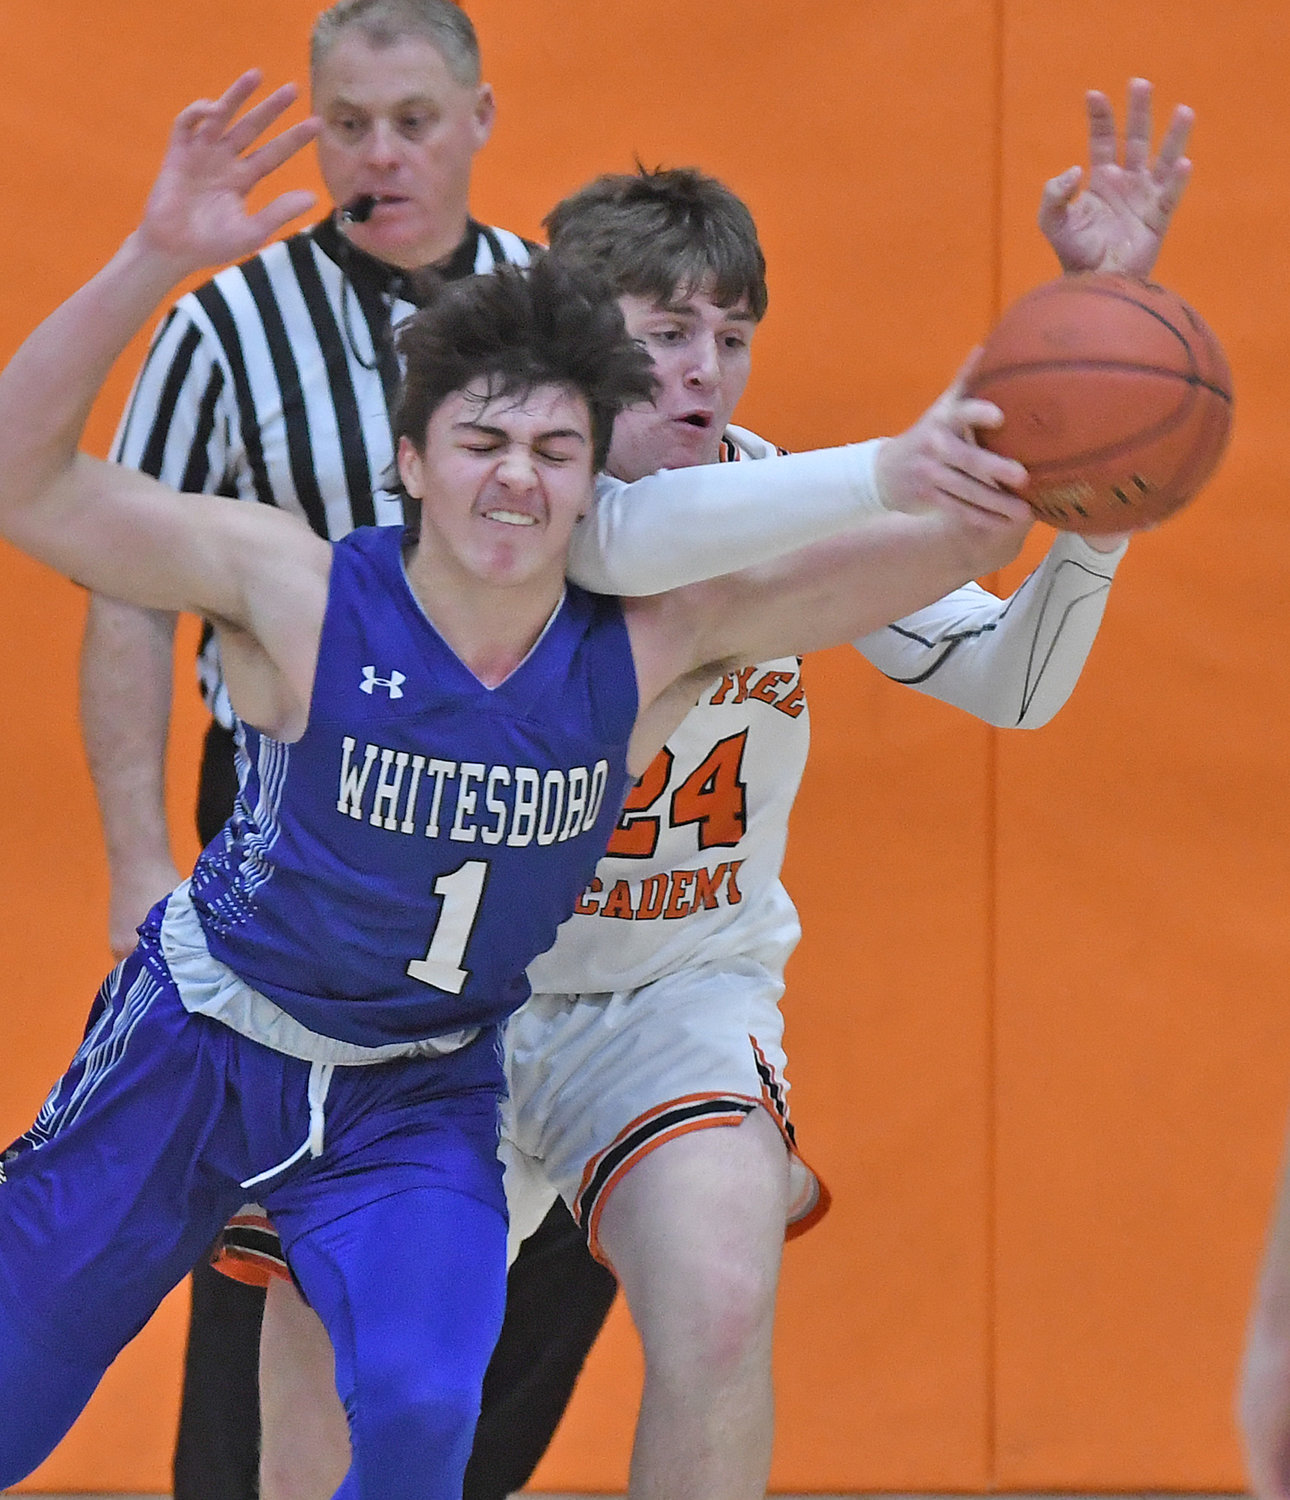 Whitesboro's Anthony Dorozynski, left, and Rome Free Academy's Luke Hammon battle for the ball in the first half Tuesday night. The Black Knights won 52-37 at home in the Tri-Valley League.